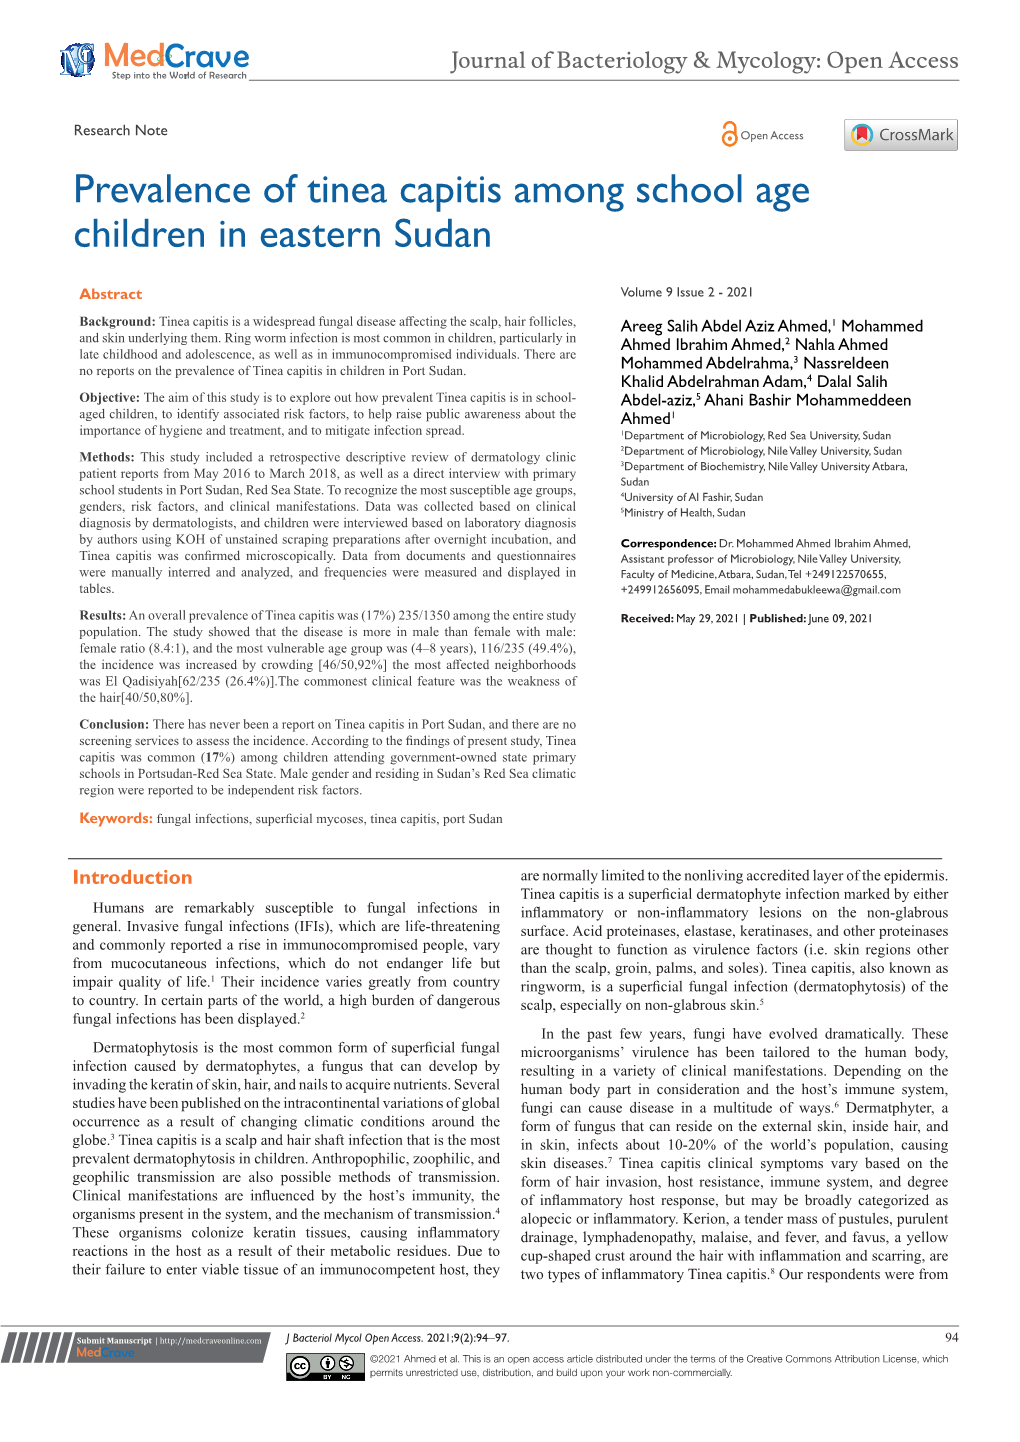 Prevalence of Tinea Capitis Among School Age Children in Eastern Sudan